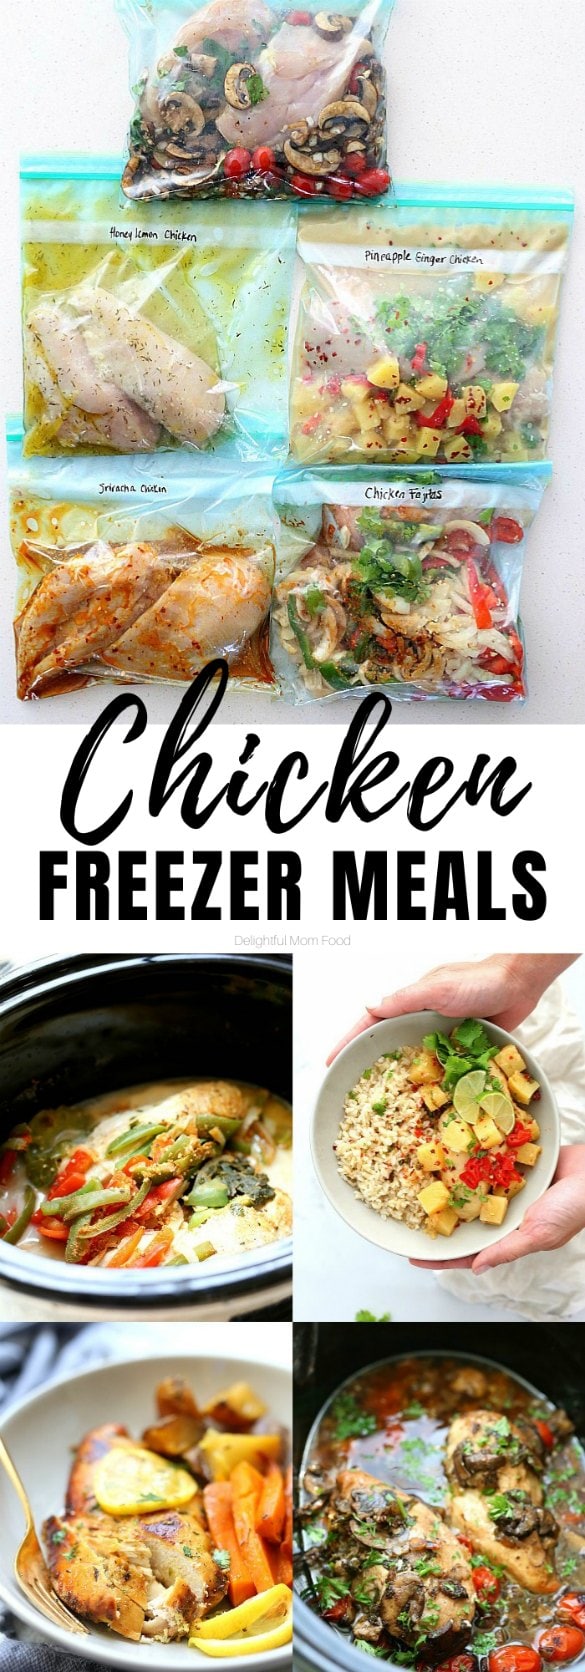 Five tasty chicken freezer meals you can make ahead! These healthy chicken meal prep ideas make busy weeknights a breeze, help you eat healthy and reduce the amount of dishes that need cleaning! #freezermeals #dinner #mealprep #chicken #glutenfree #easy #slowcookermeals | Recipes at Delightful Mom Food